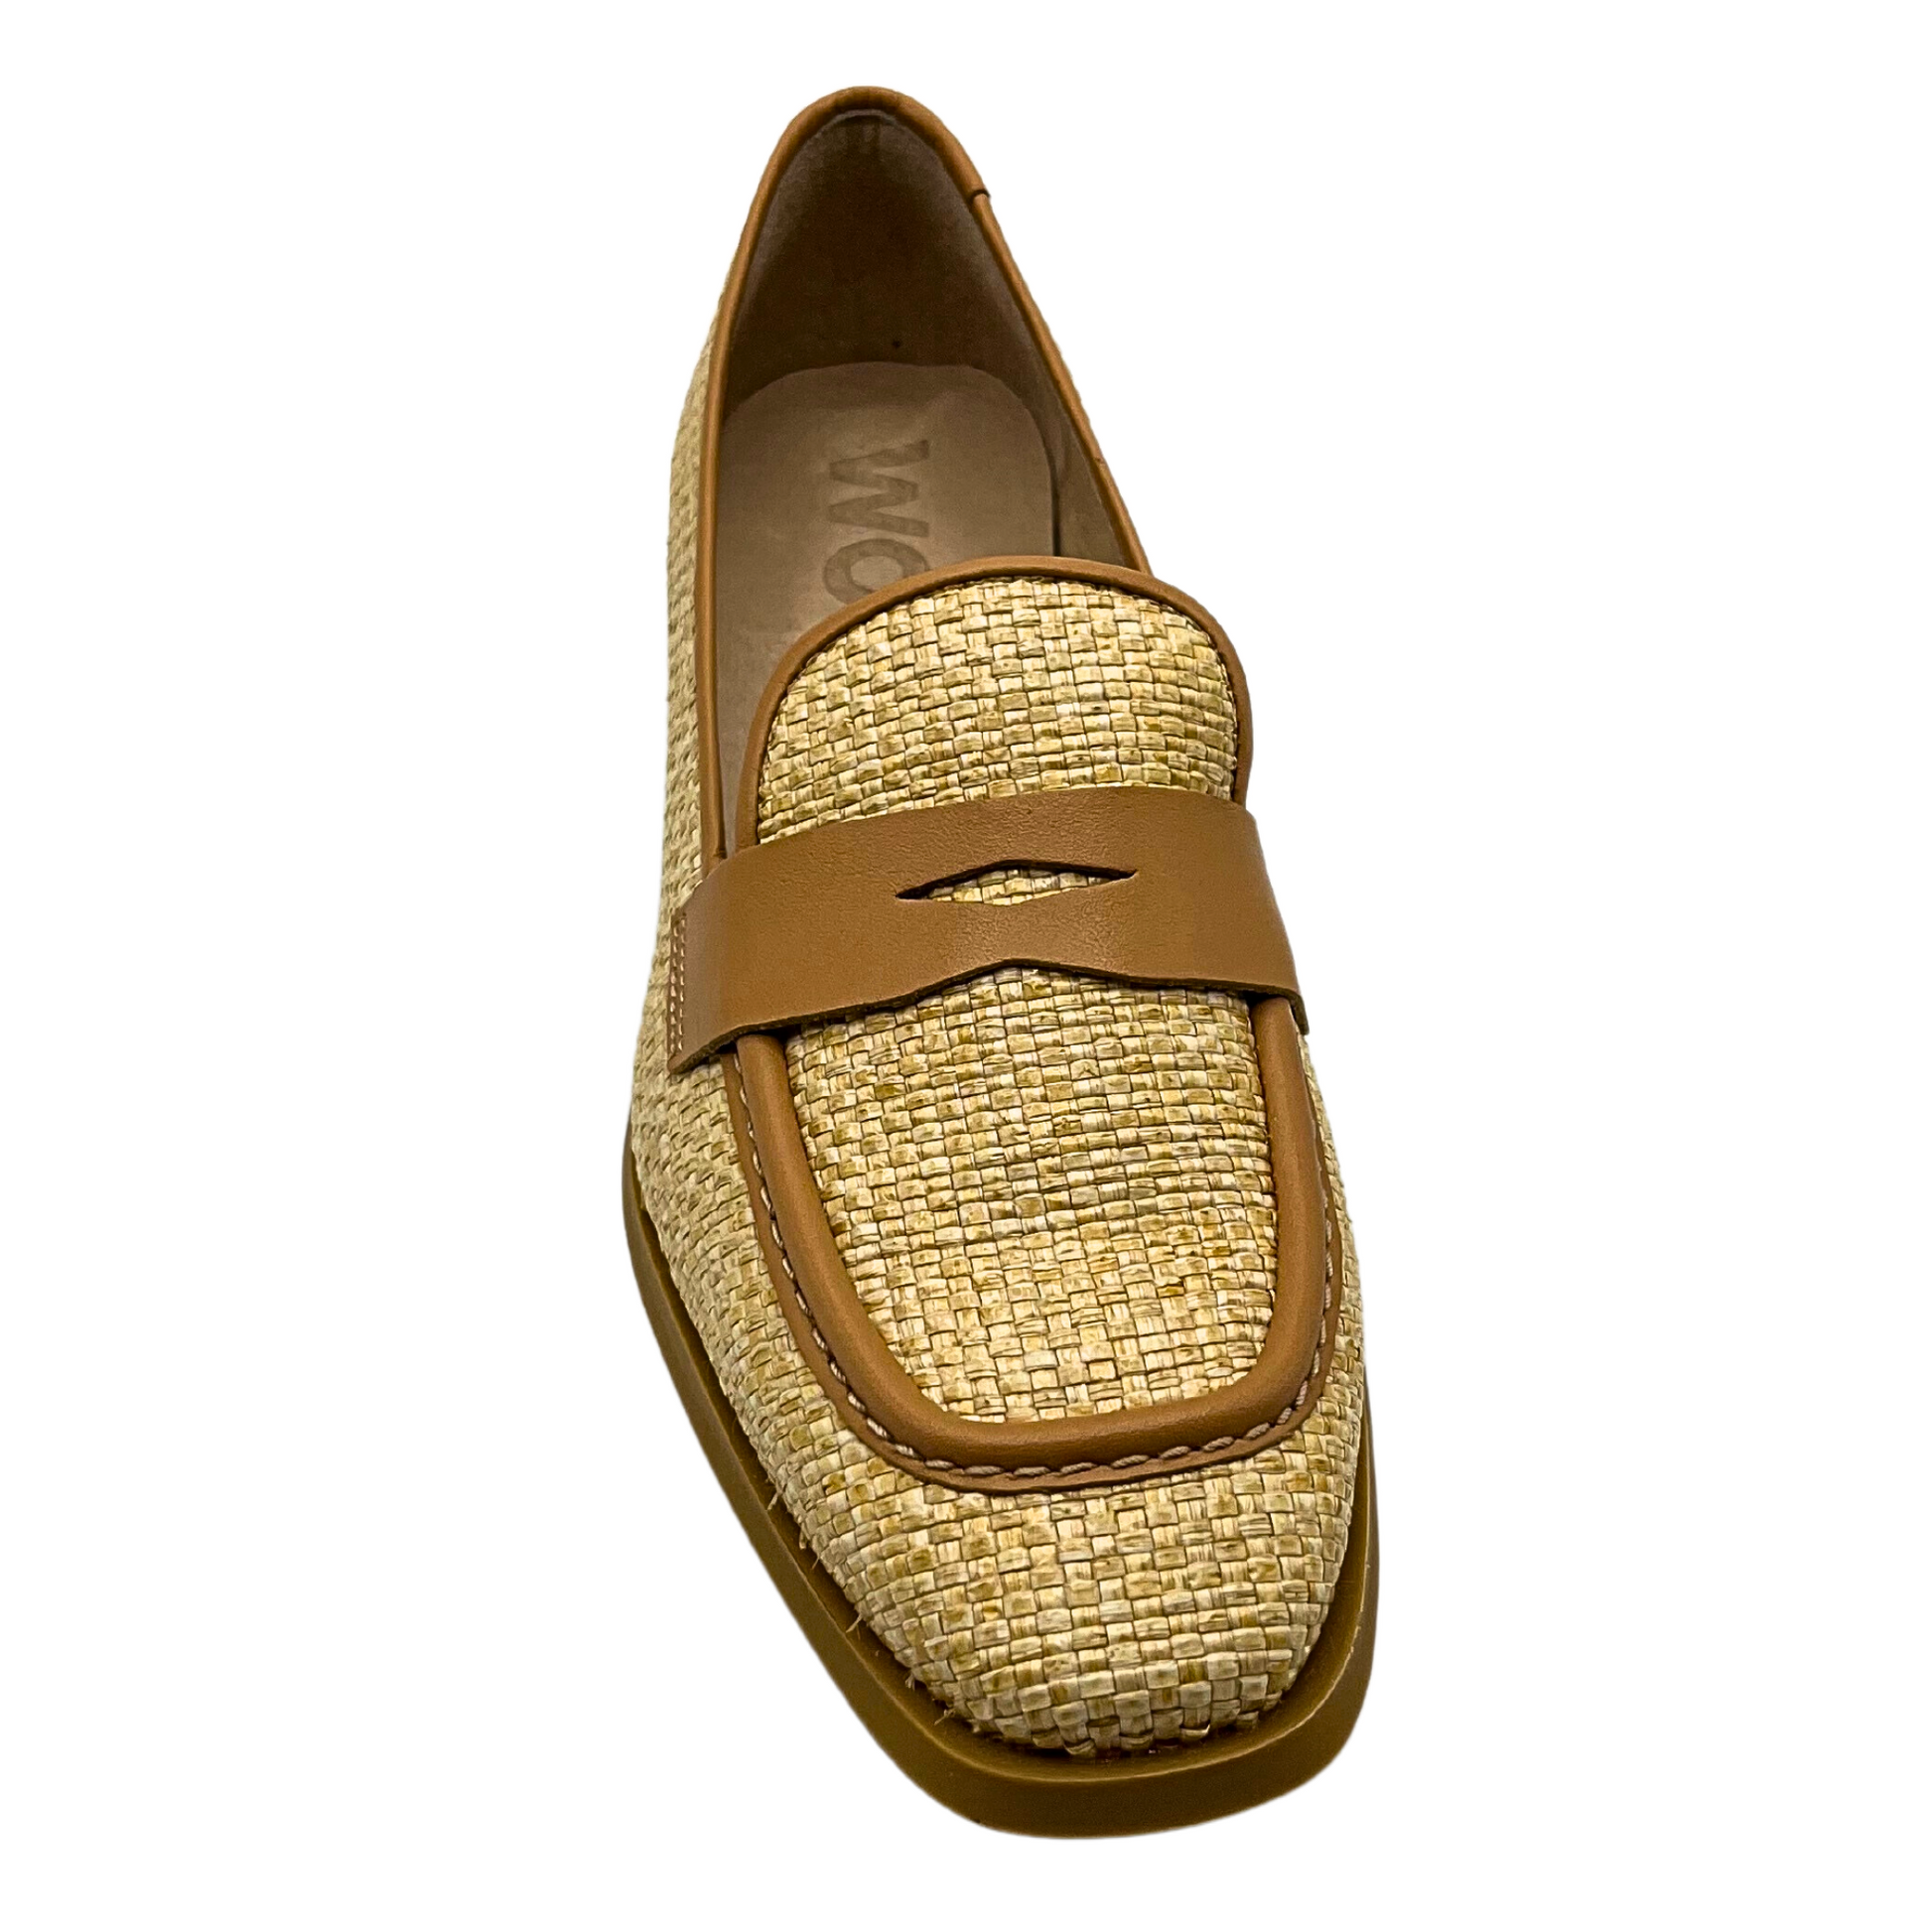 Top down view of a slip on loafer.  Unique upper is leather patterned to look like natural raffia.  Trim details are in a smooth, brown leatherare